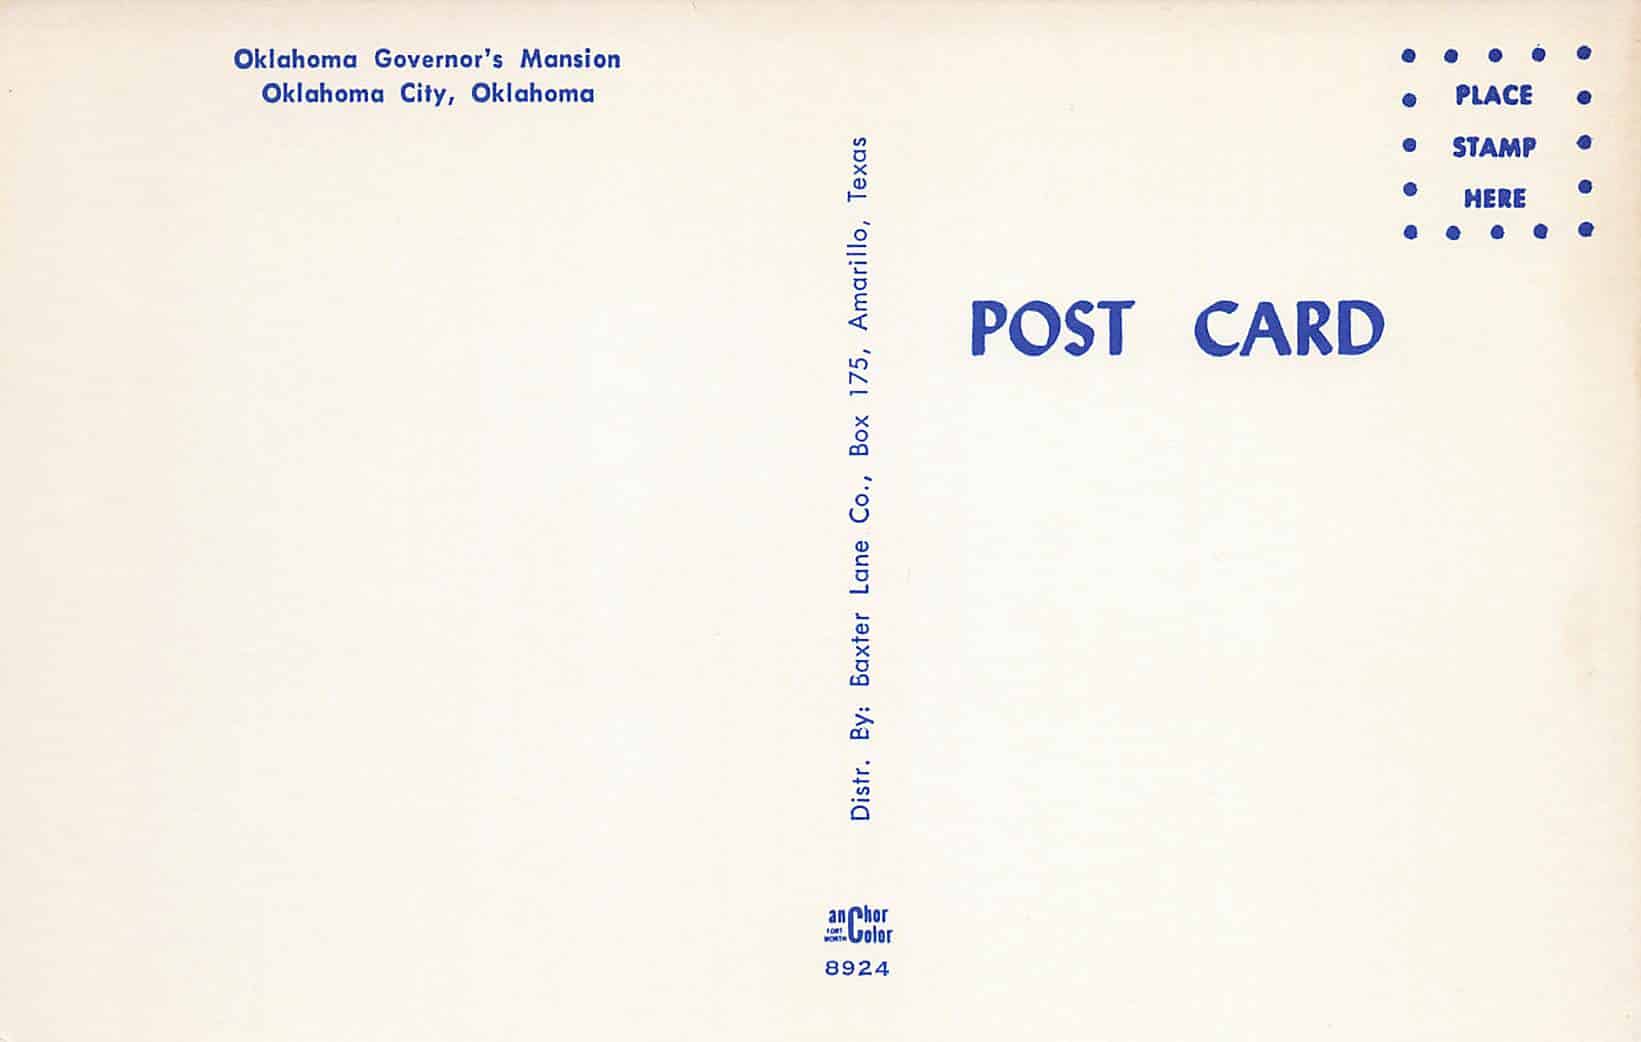 The back of a blue and white postcard.